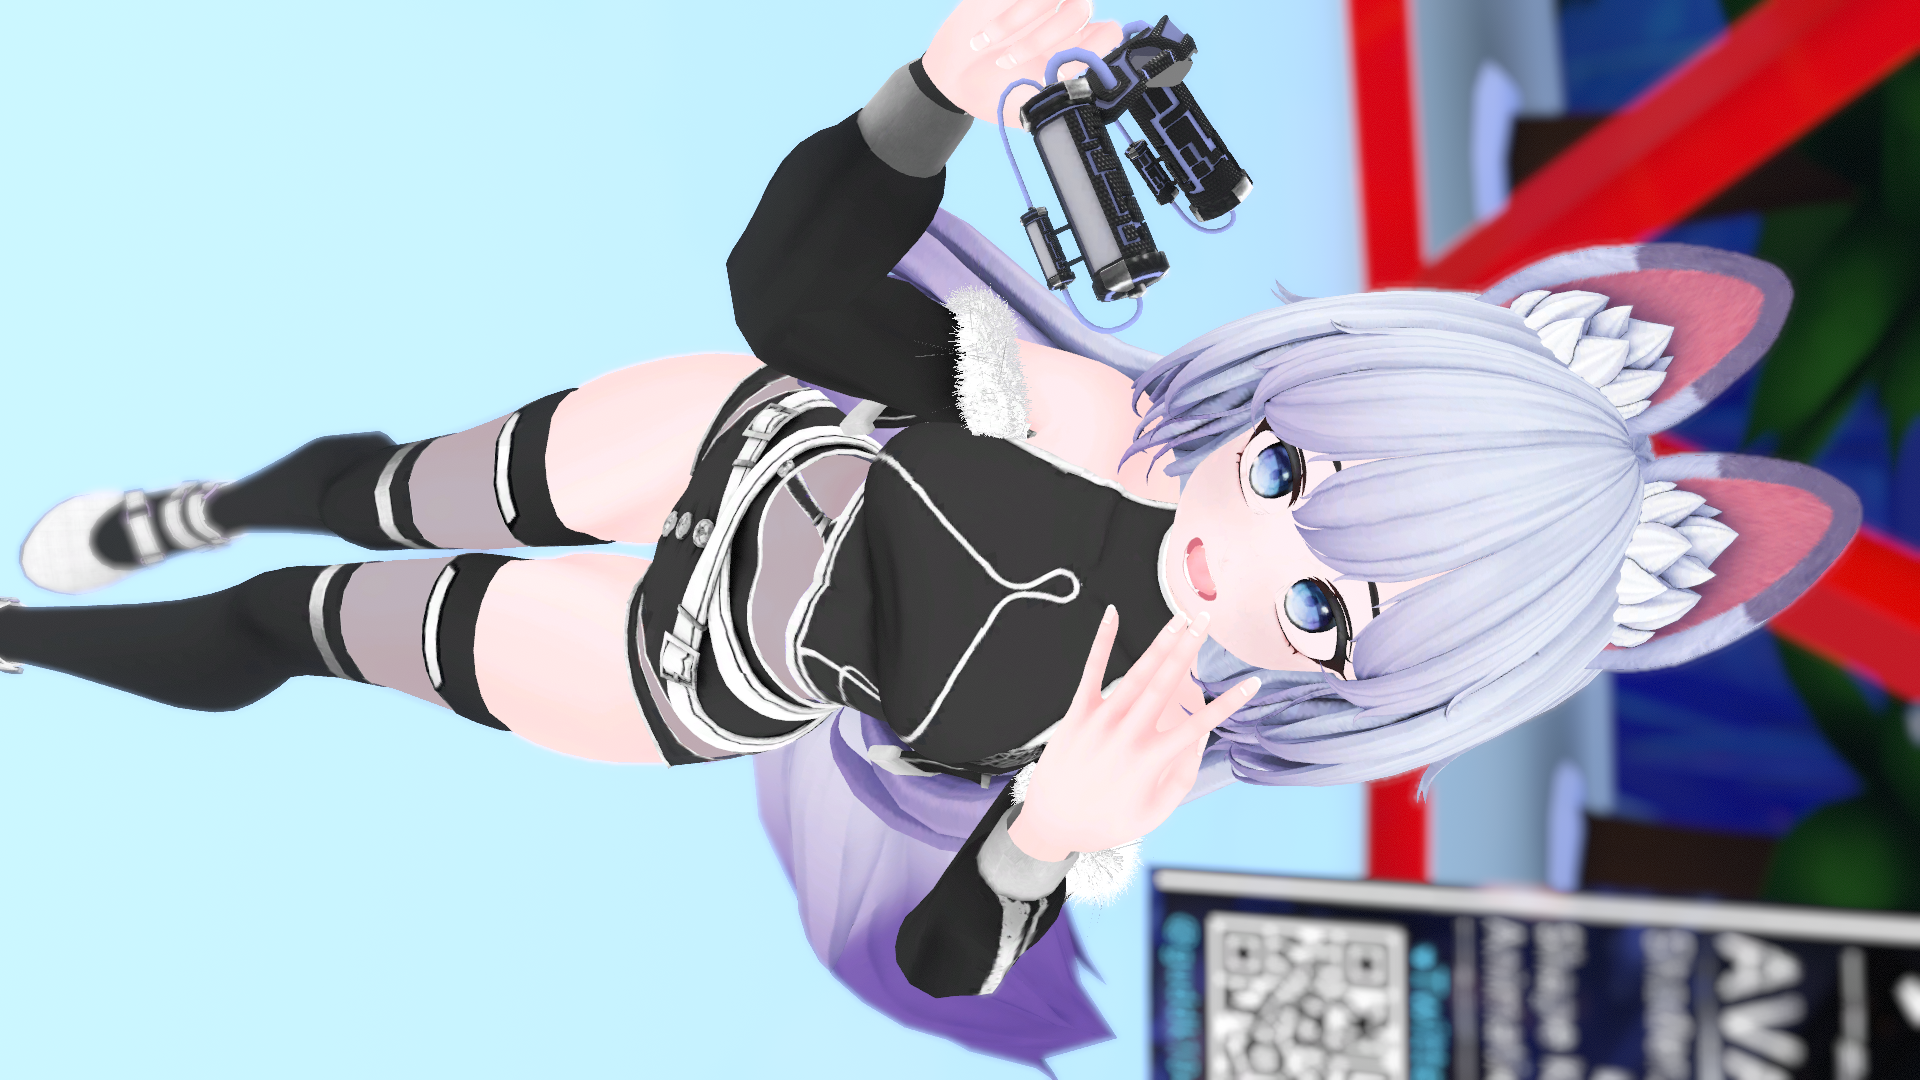 VRChat_1920x1080_2021-12-05_04-58-50.821.png